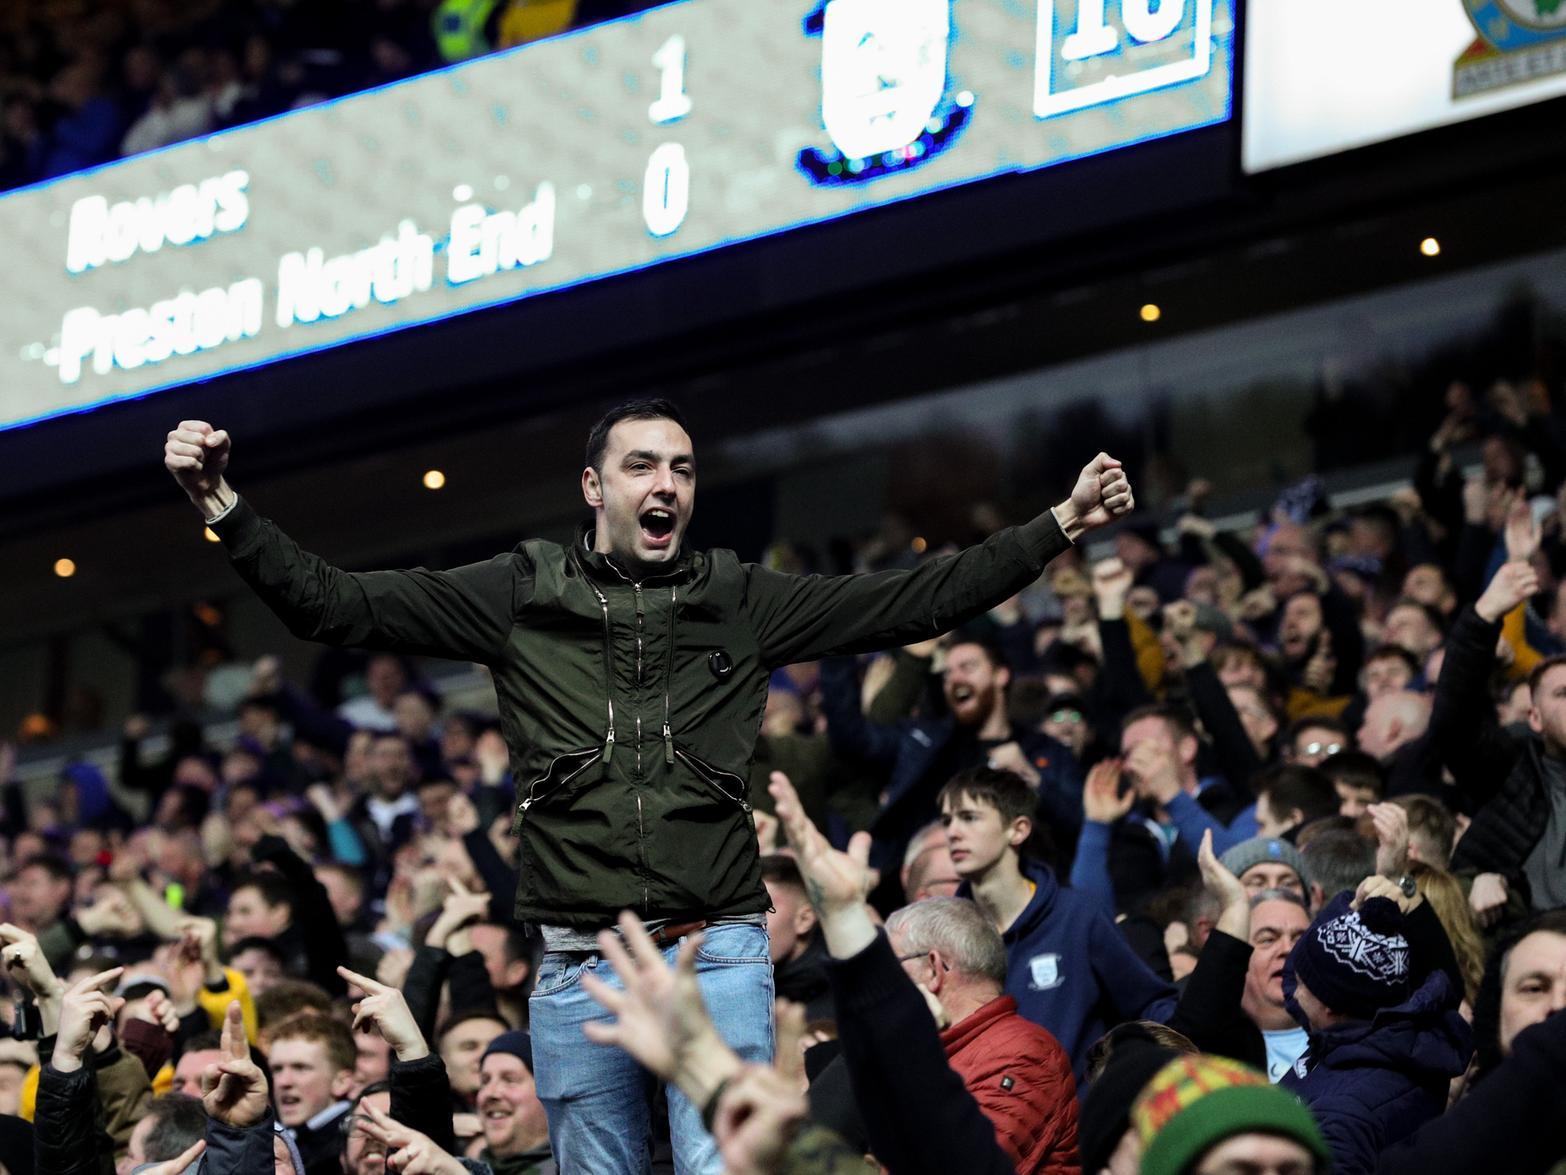 This PNE supporter stands for a better view